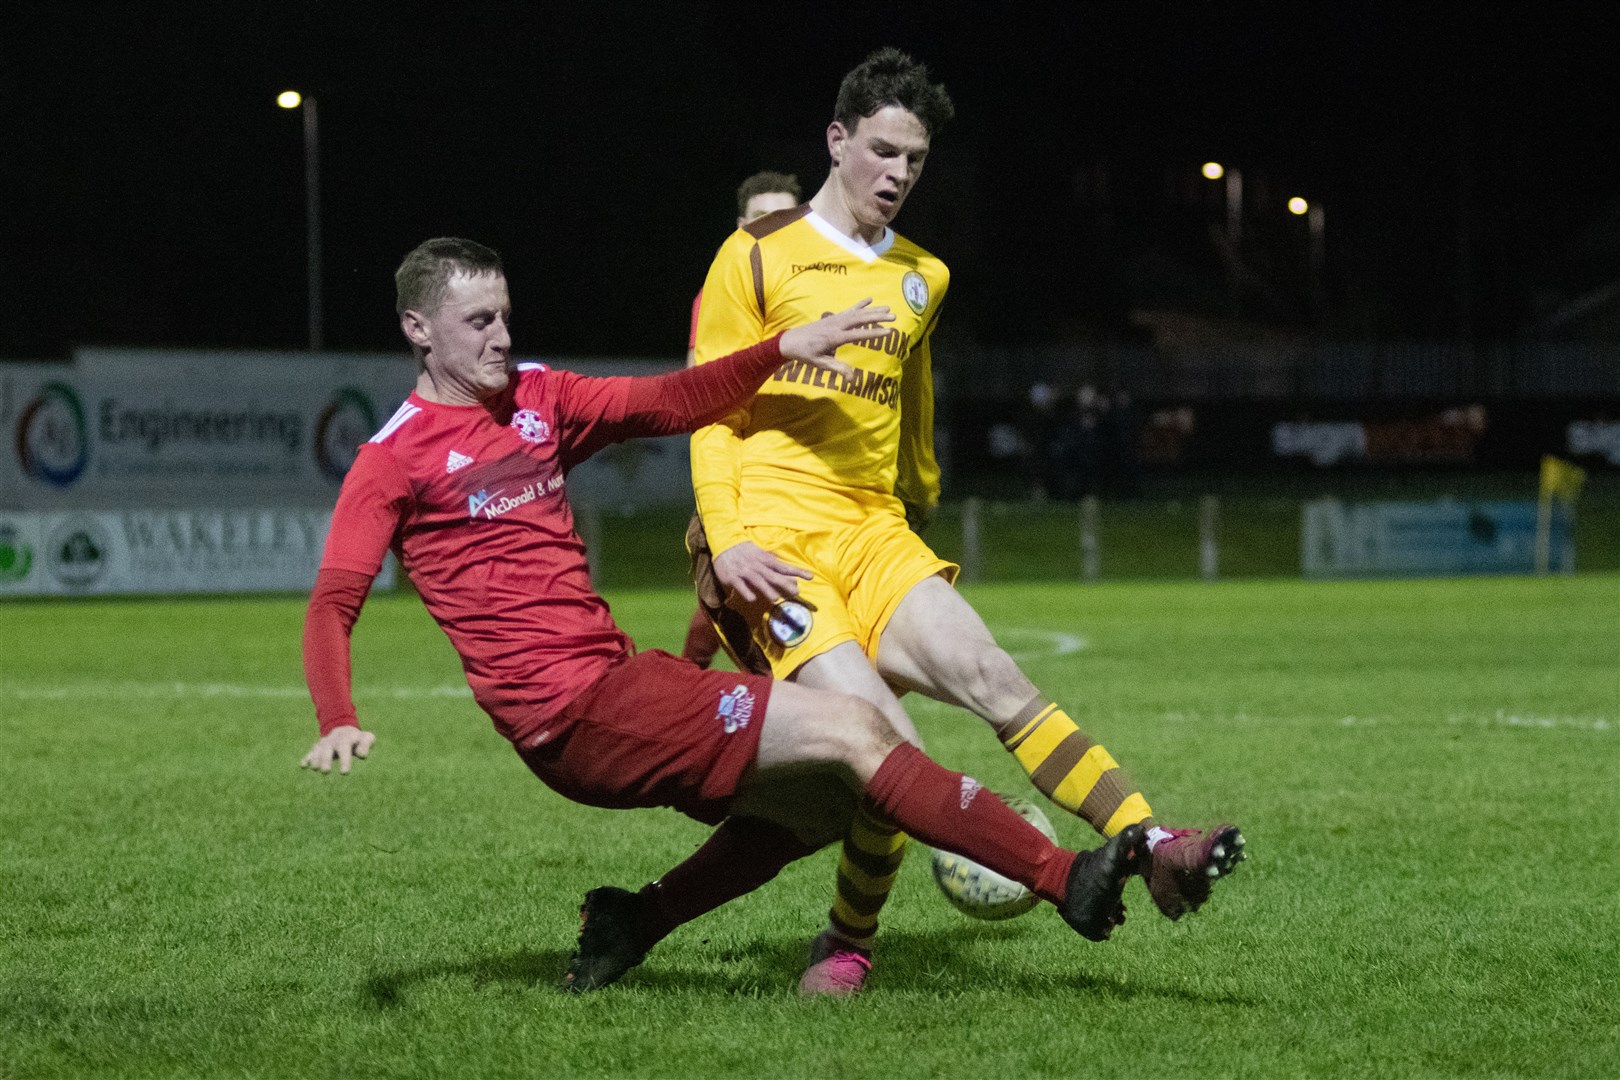 Lossie full back Michael Weir goes in for a challenge on Forres' Ryan Macleman...Forres Mechanics FC (1) vs Lossiemouth FC (0) - Highland Fotball League 22/23 - Mosset Park, Forres 23/12/22...Picture: Daniel Forsyth..